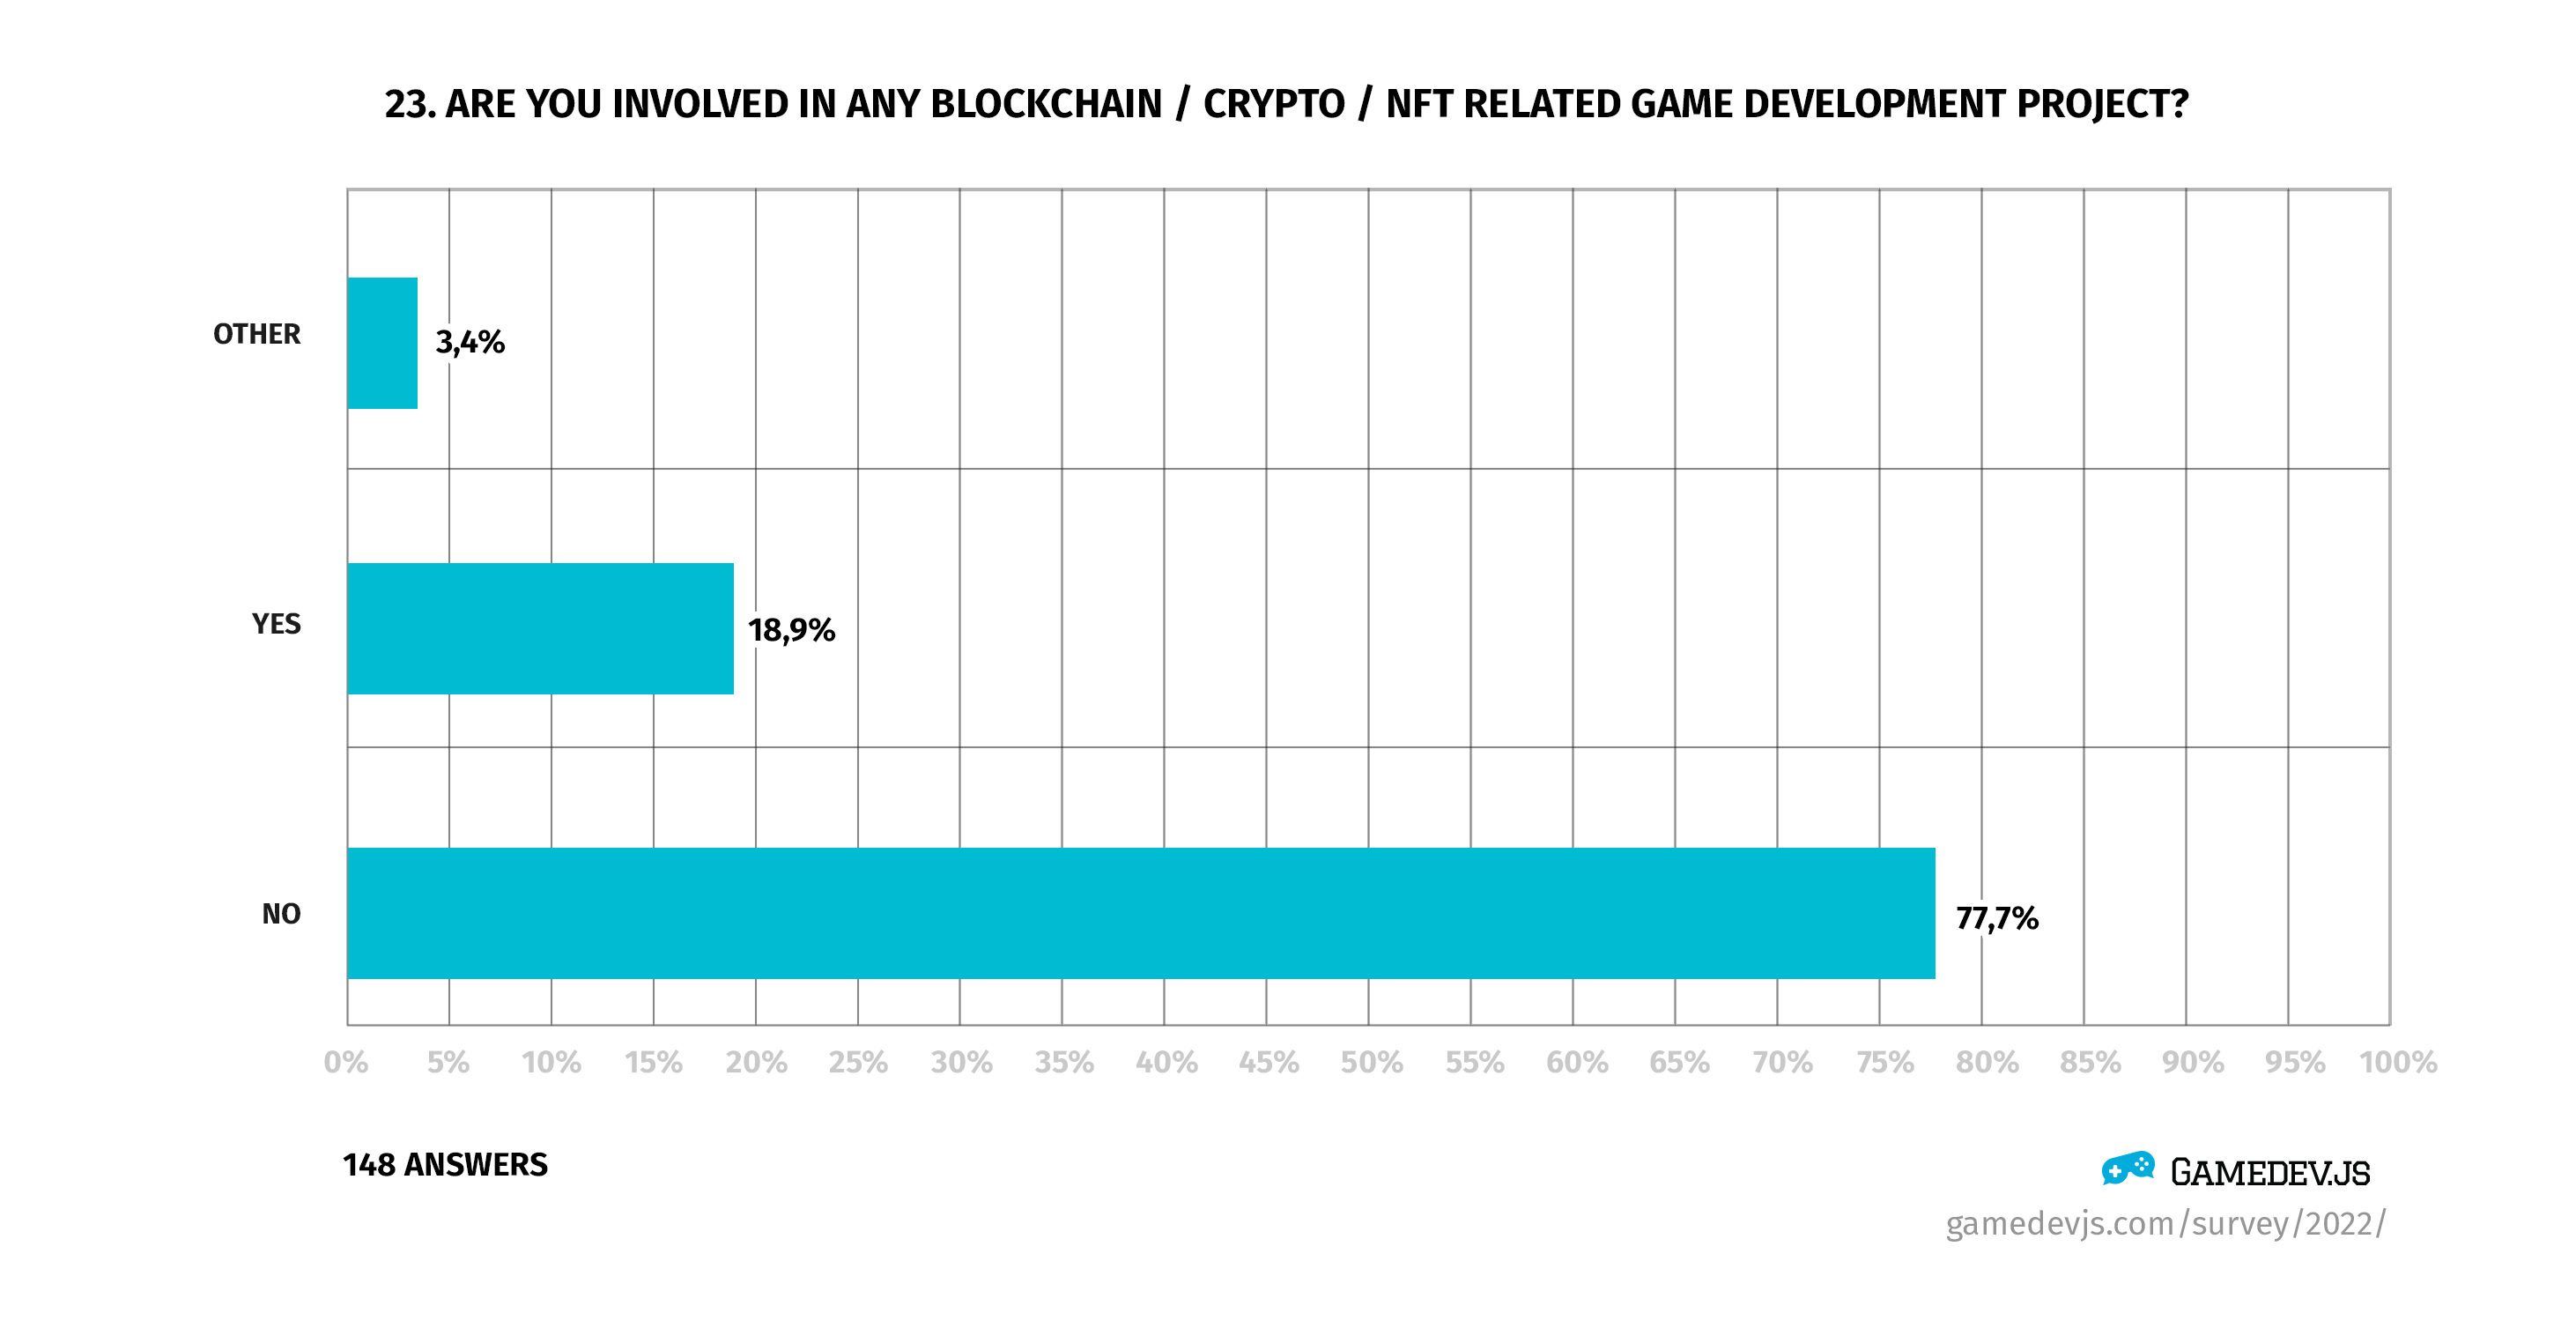 Gamedev.js Survey 2022 - Question #23: Are you involved in any blockchain ⁄ crypto ⁄ NFT related game development project?